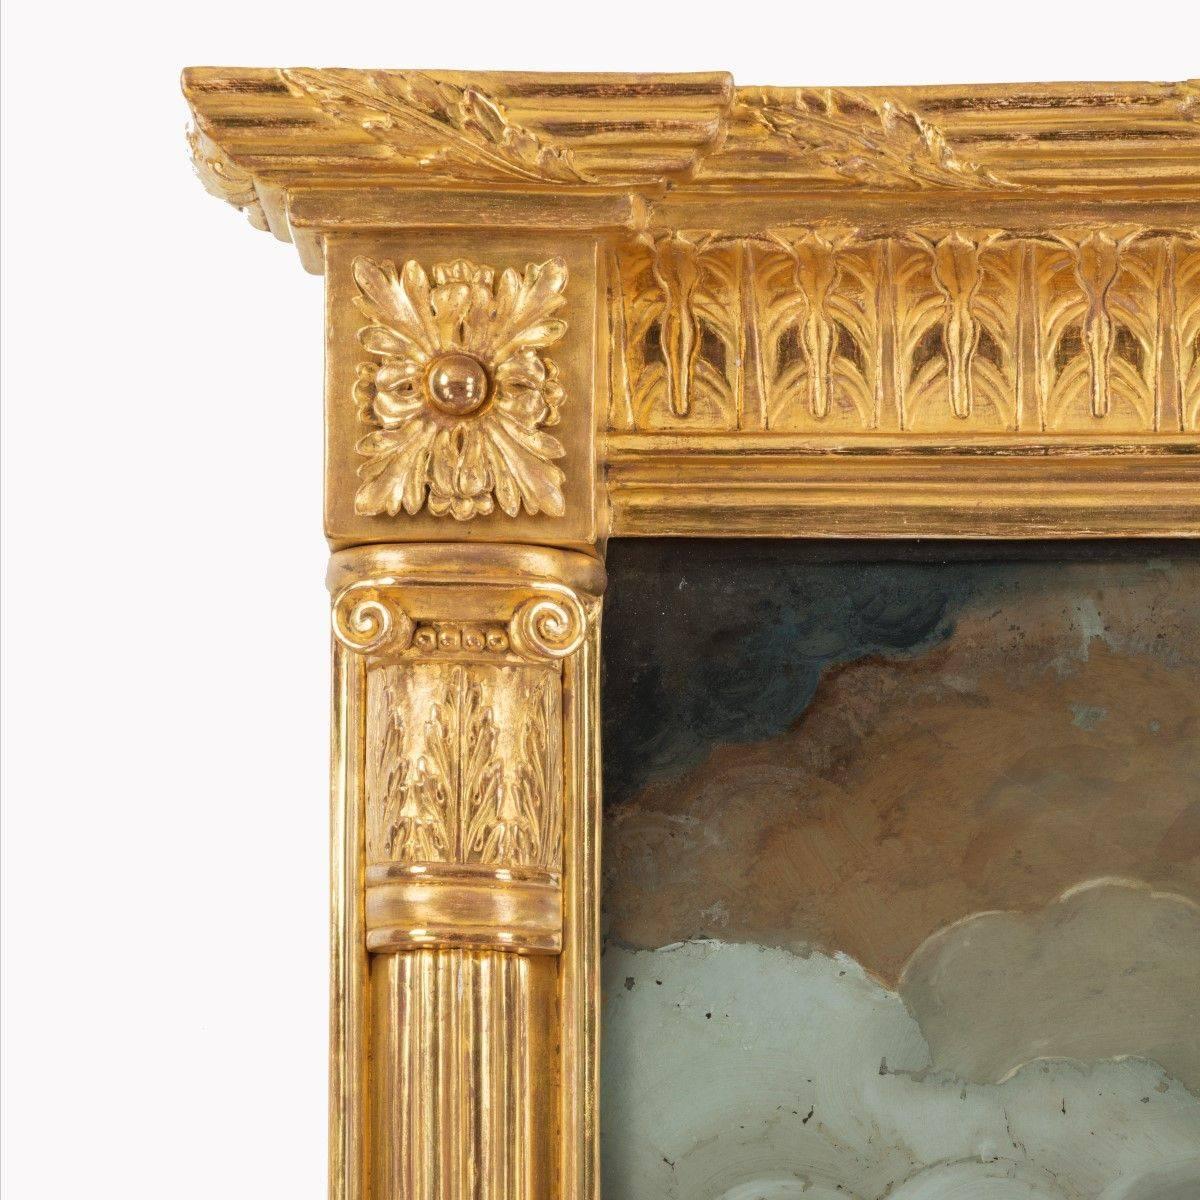 This pier glass is of narrow rectangular form comprising three panels within acanthus capped gilt wood columns. 

The upper panel with a reverse-glass painting of a naval battle, probably the Battle of the Nile. The lower panel showing a